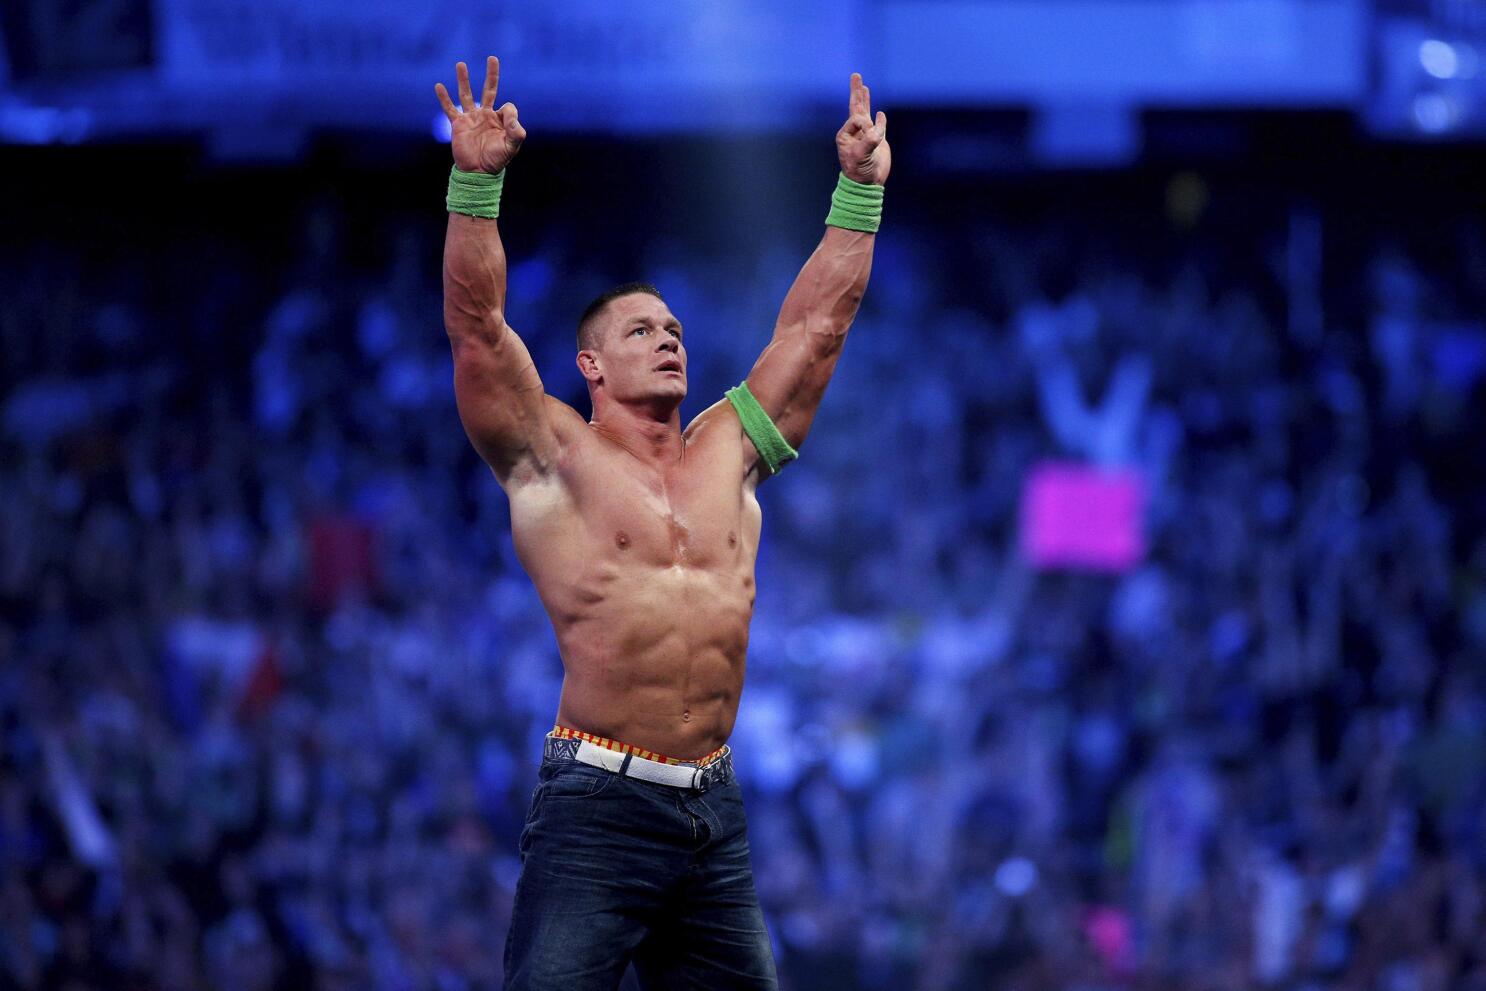 1486px x 991px - Q&A: Actor John Cena makes time for wrestling, Hollywood | AP News